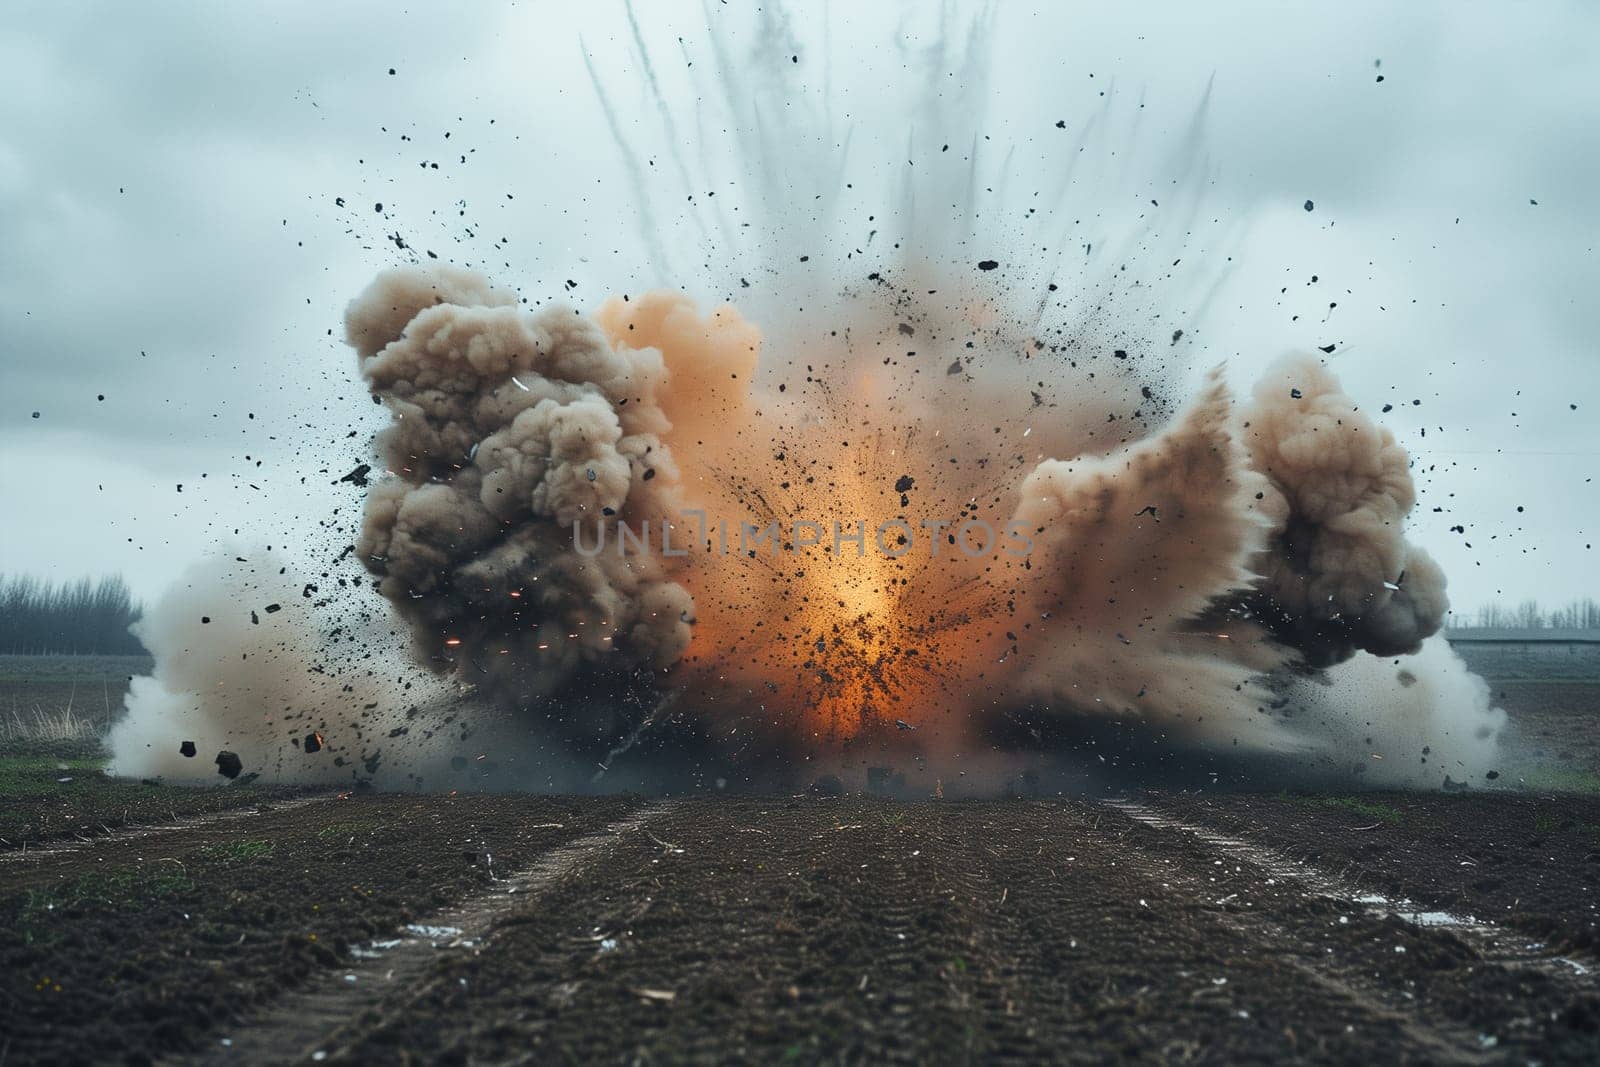 A large explosion of smoke and fire in an open field, likely caused by a war-related incident.